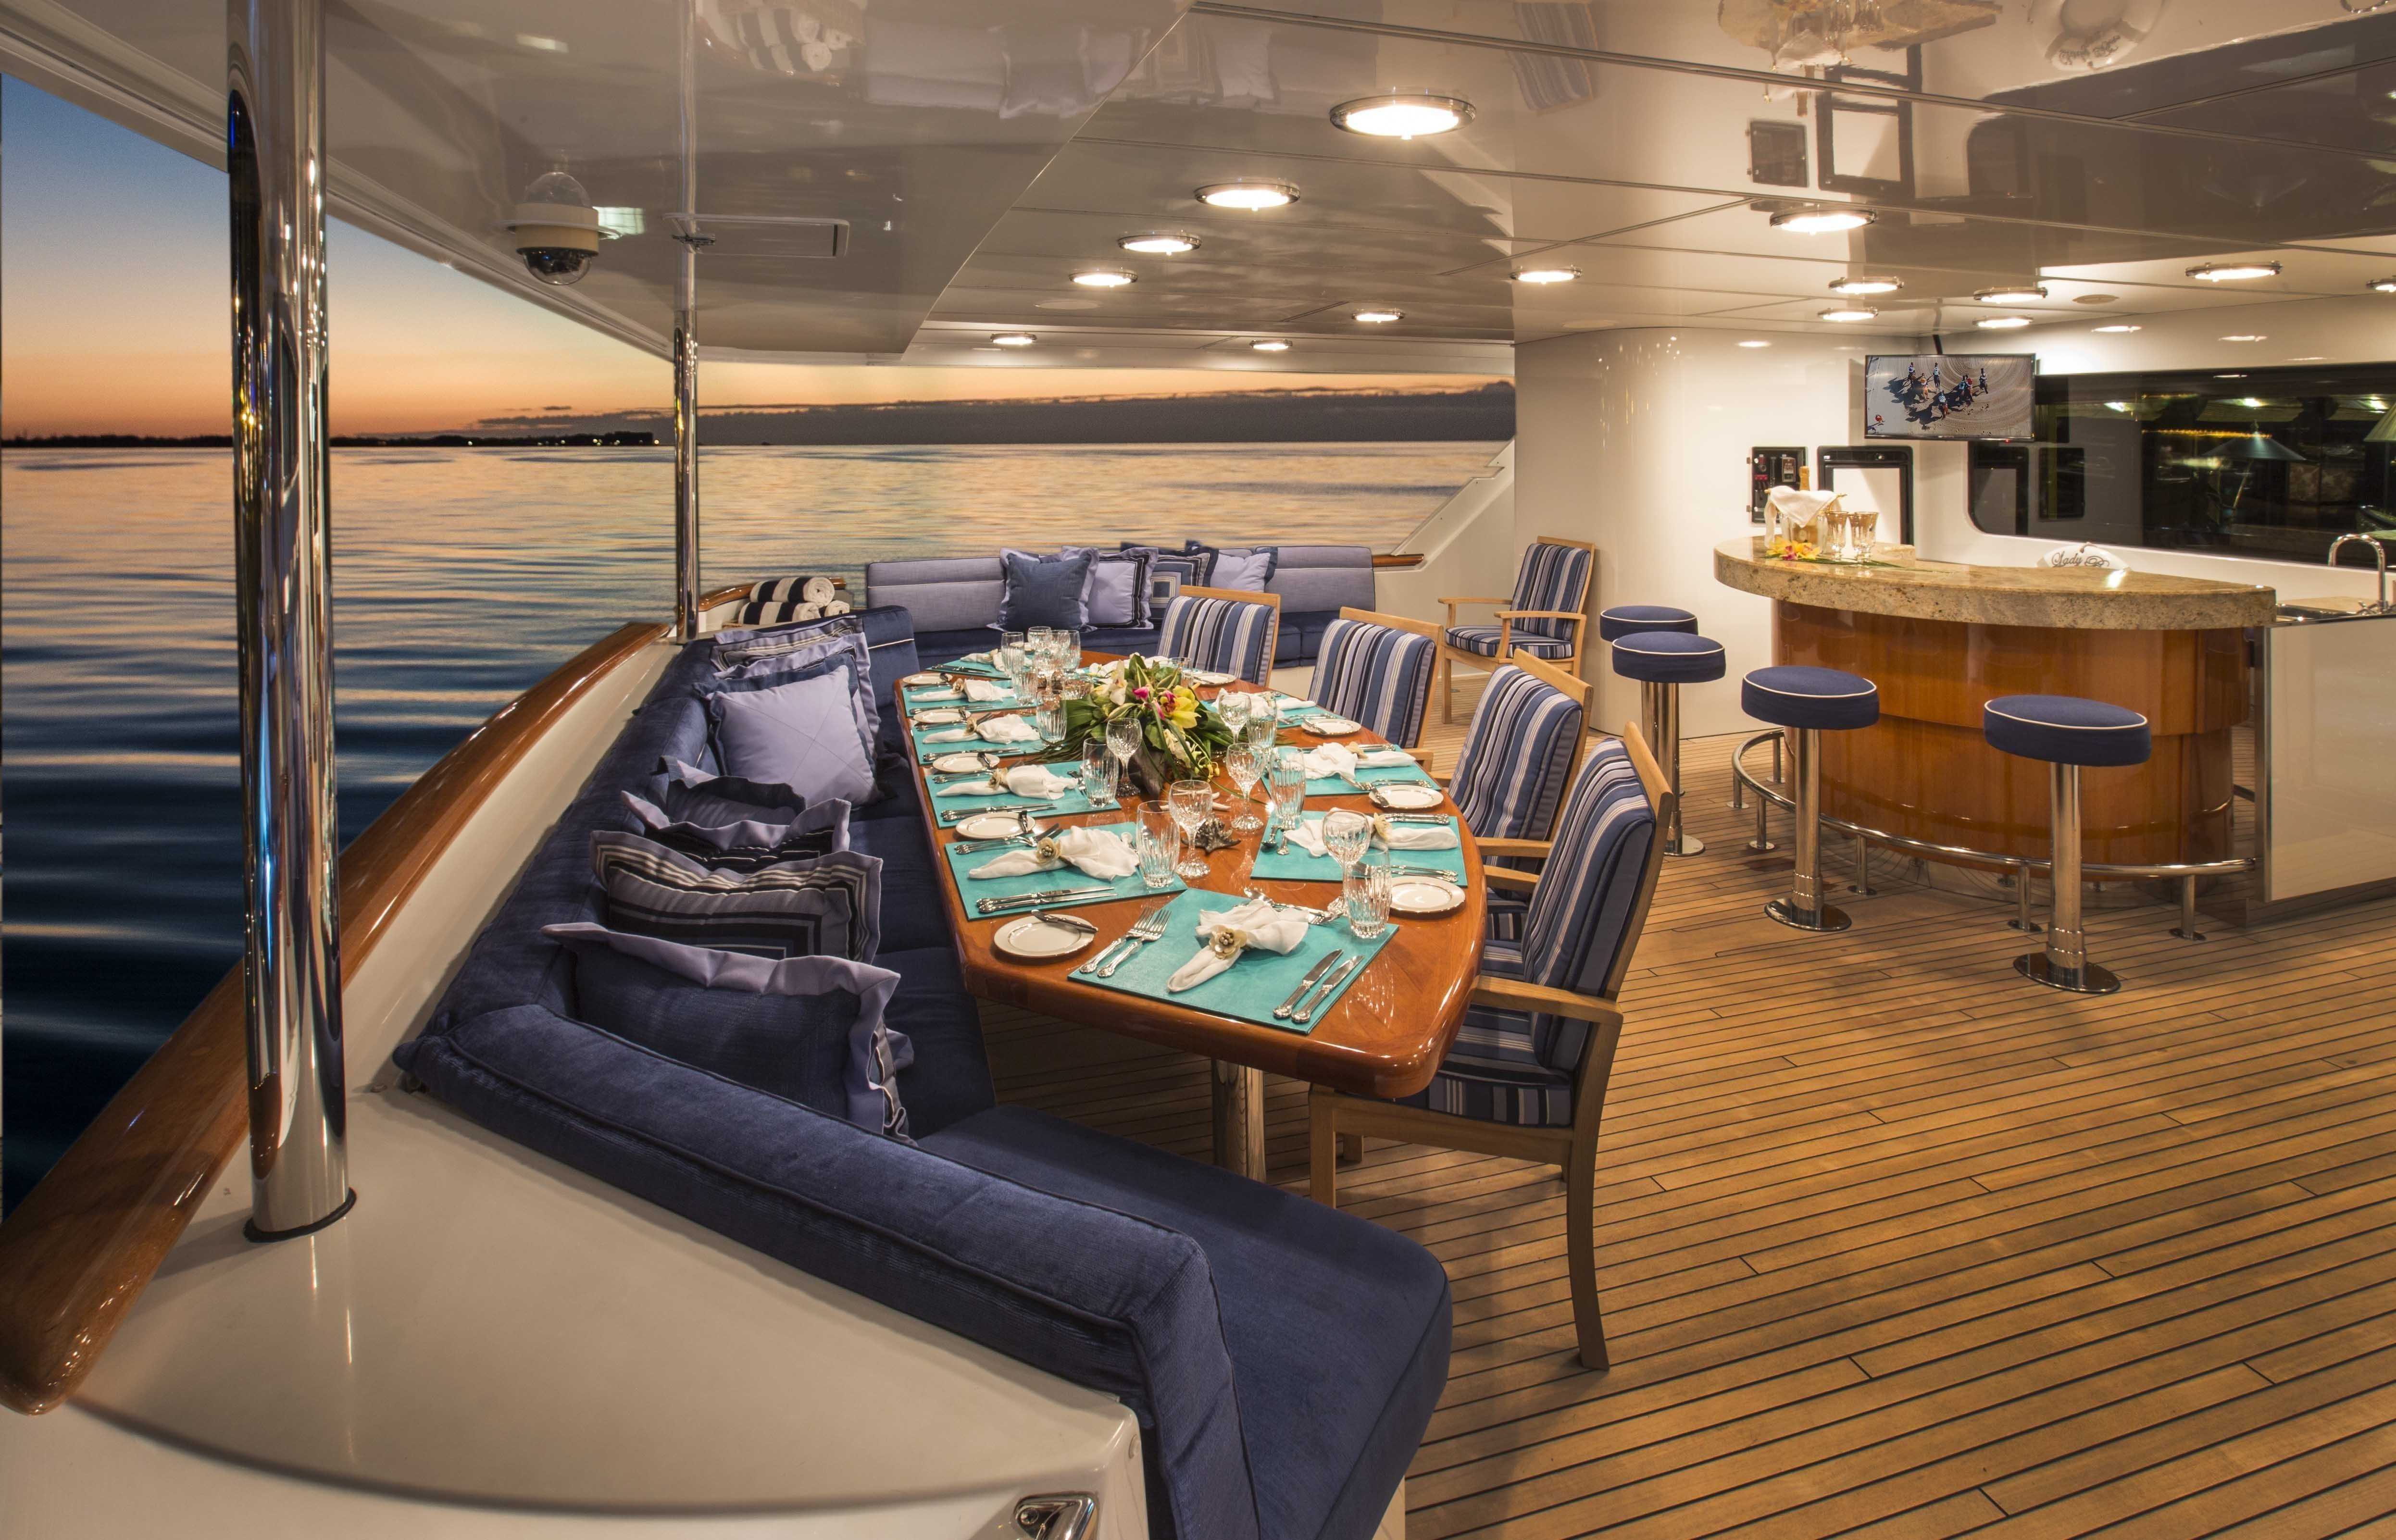 43m Yacht LADY BEE 6631 131 1 - Karen Lynn Interiors - Interior Design for Yacht, Aircrafts and Residential Projects